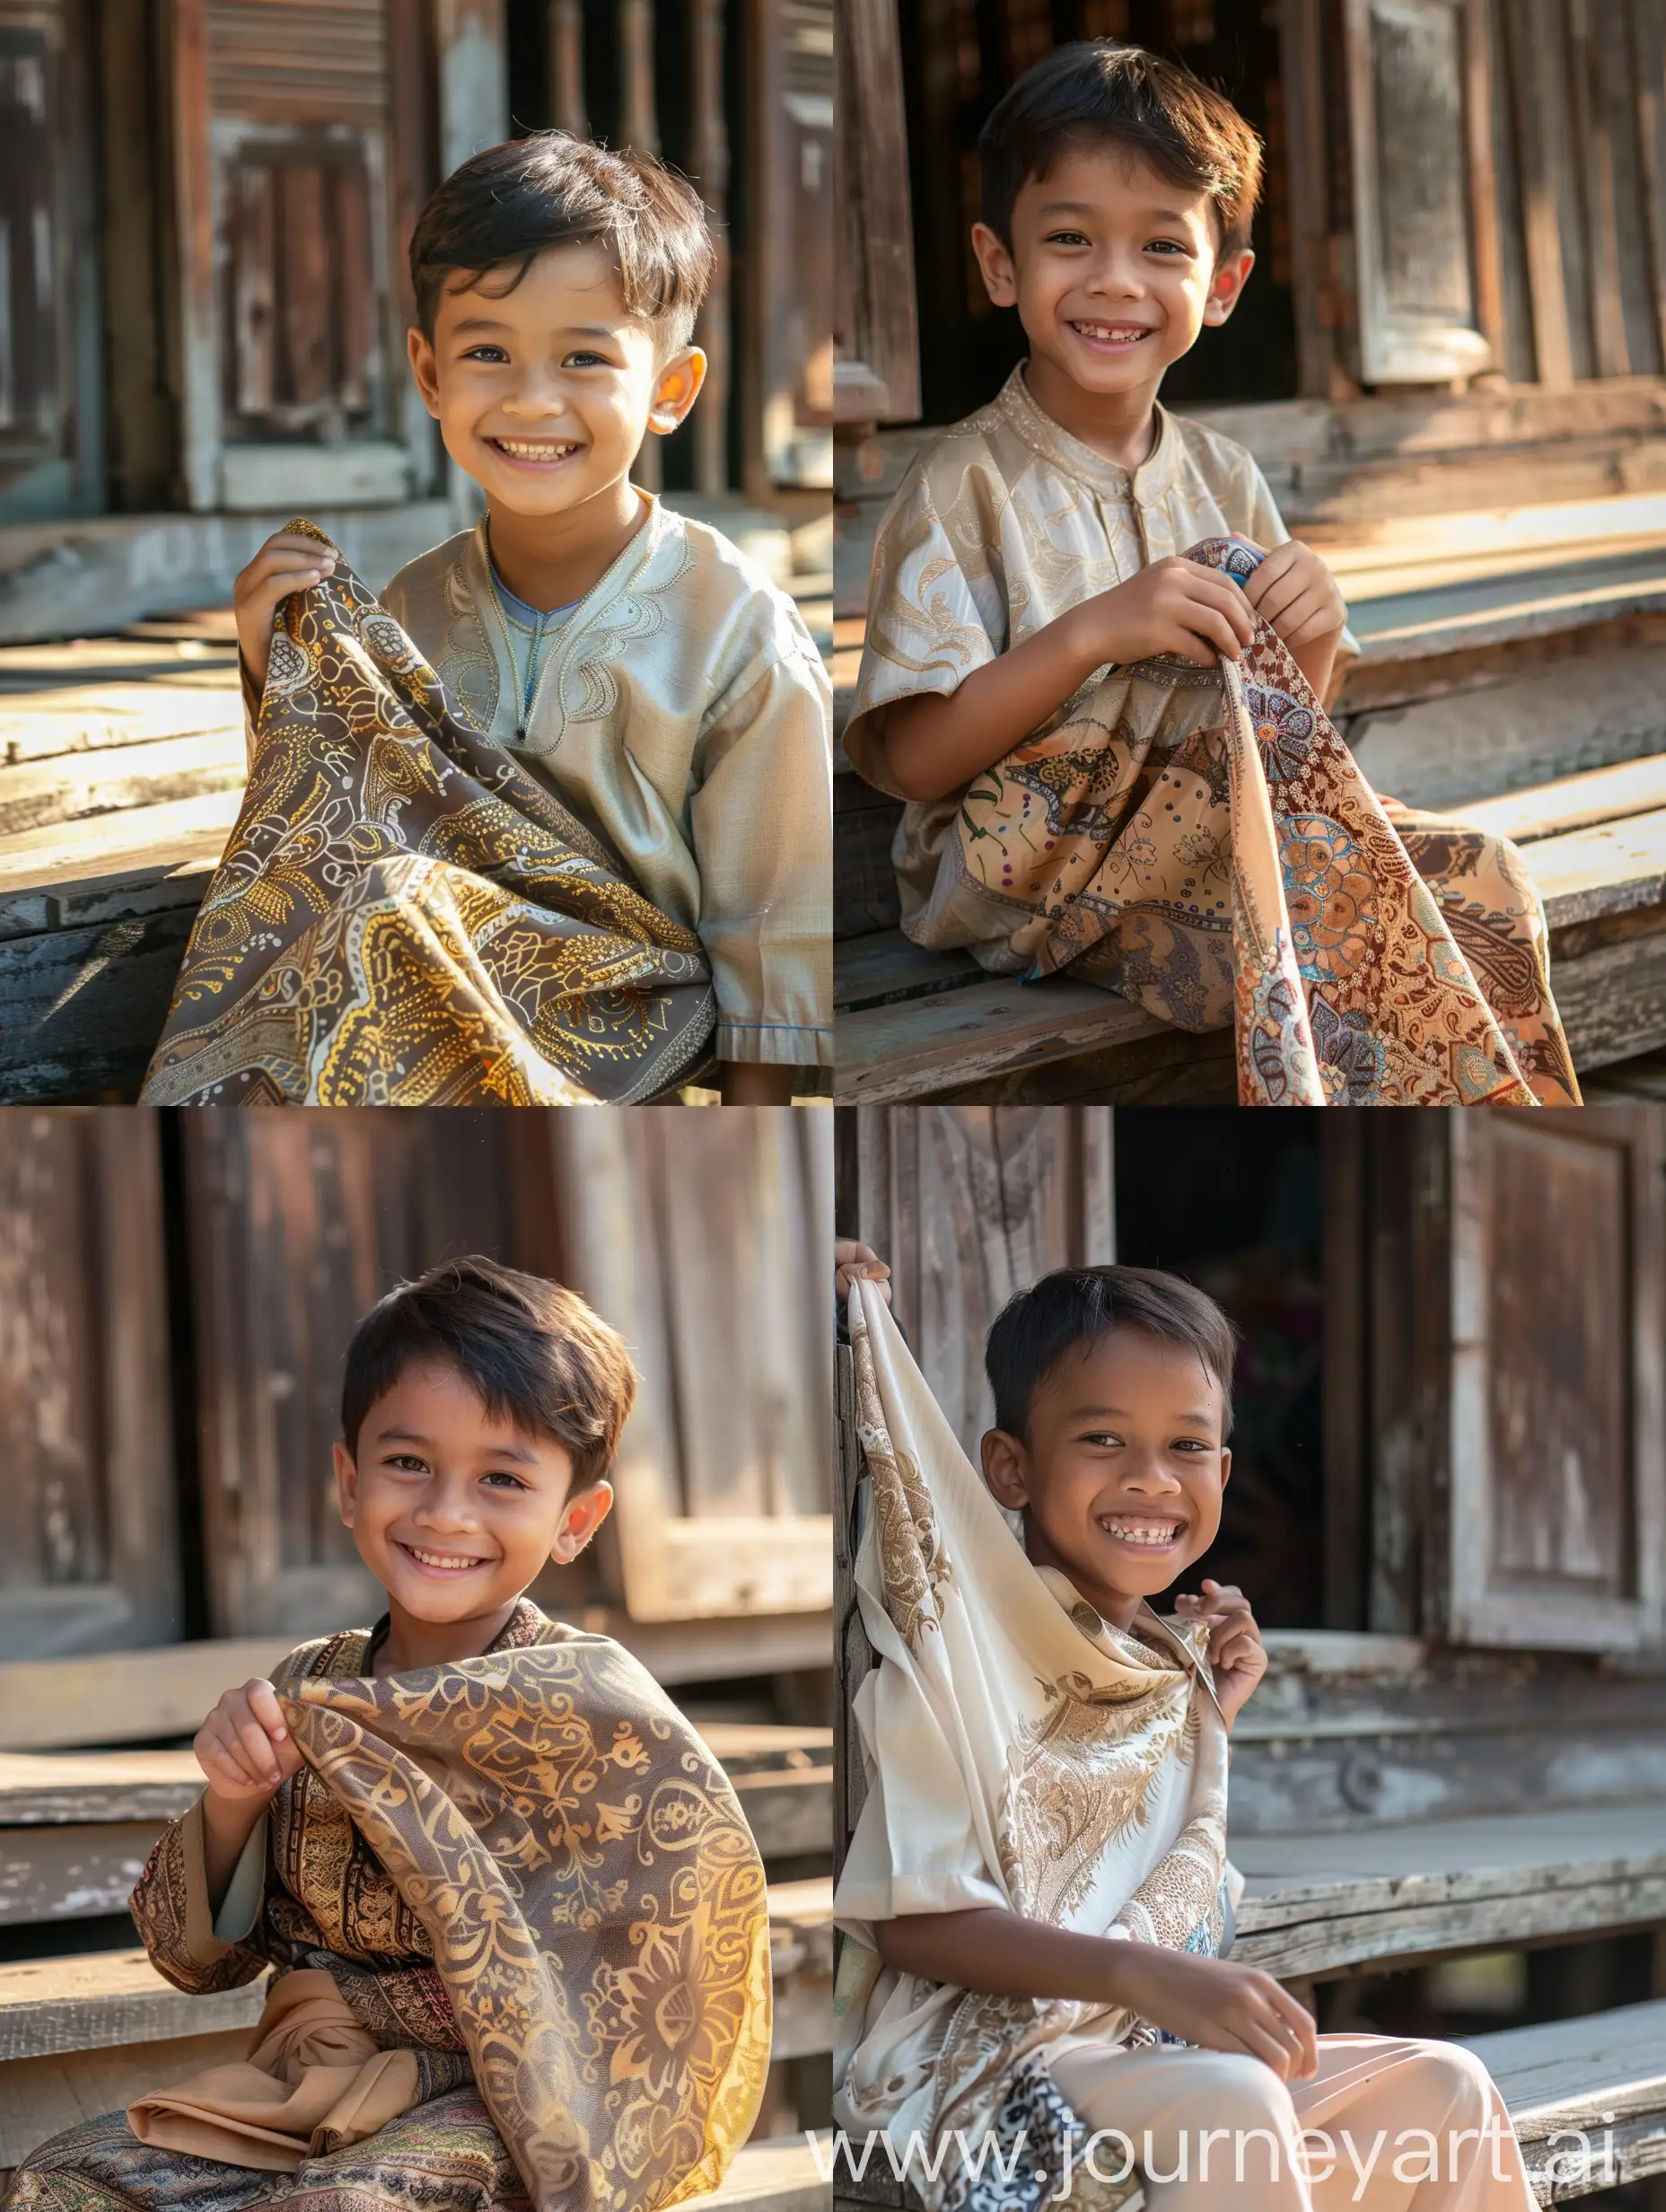 Smiling-Malay-Boy-in-Traditional-Attire-Sitting-on-Wooden-House-Steps